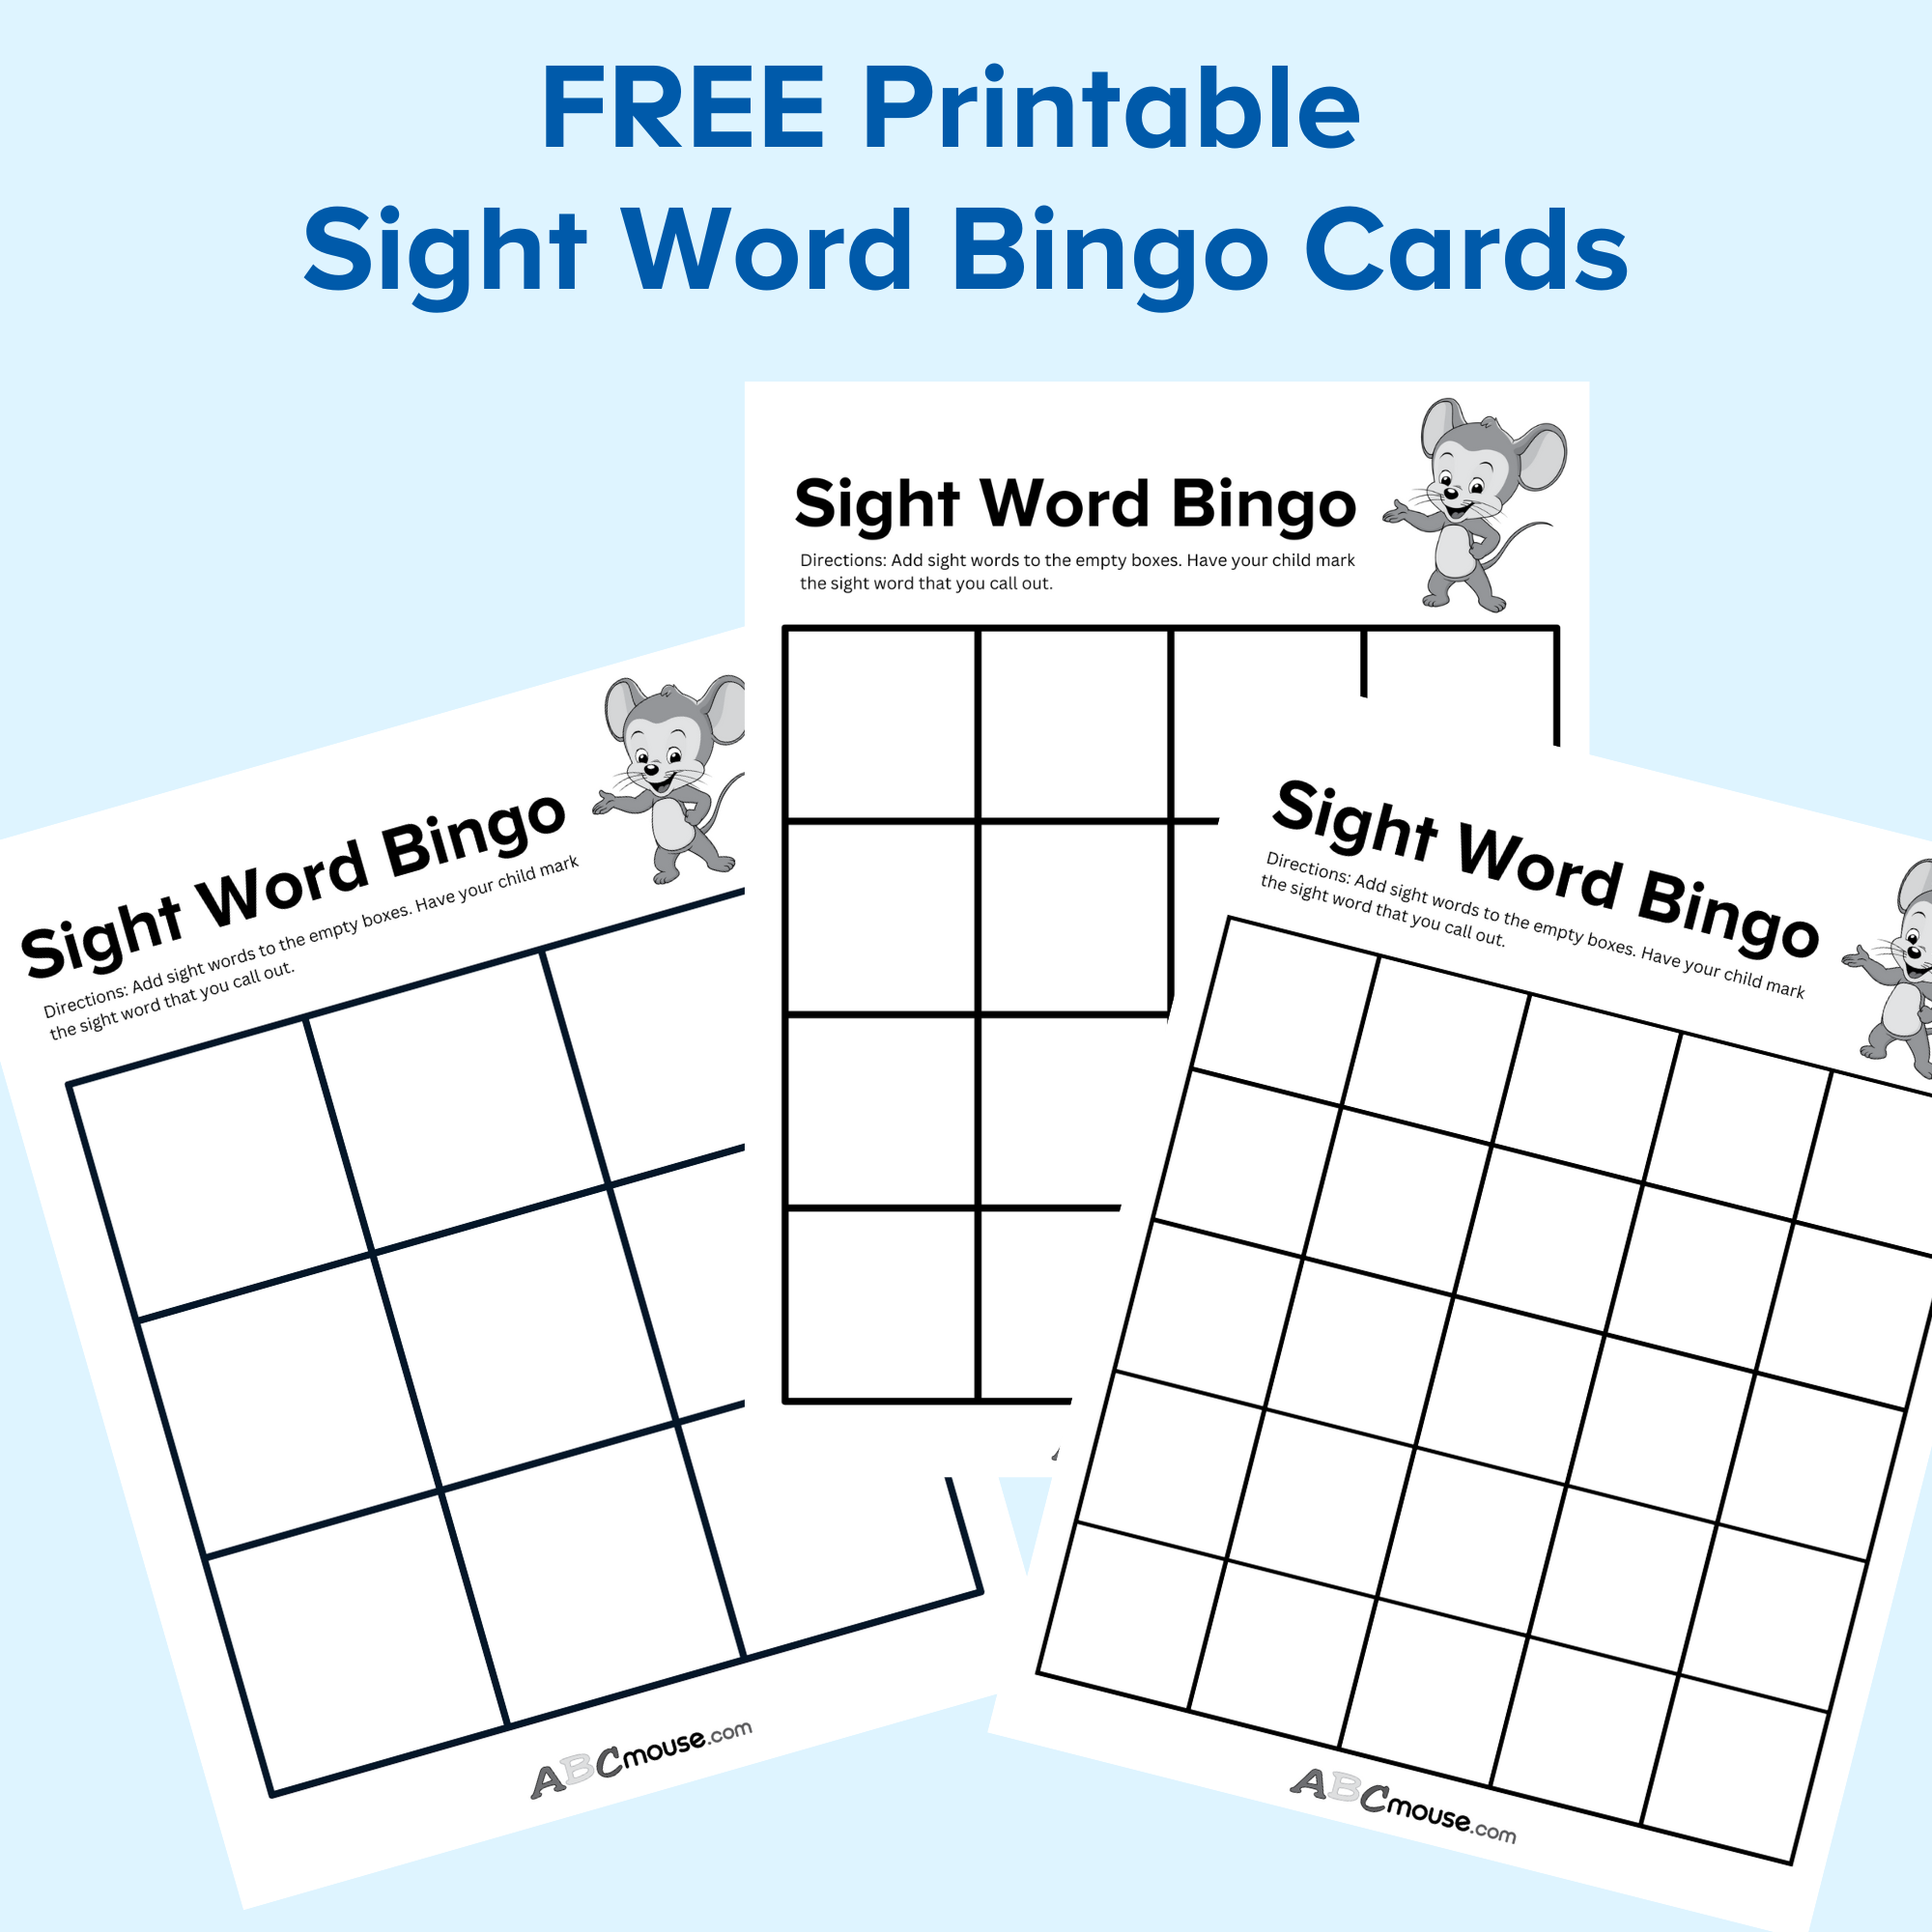 Free printable sight word bingo cards from ABCmouse.com. 